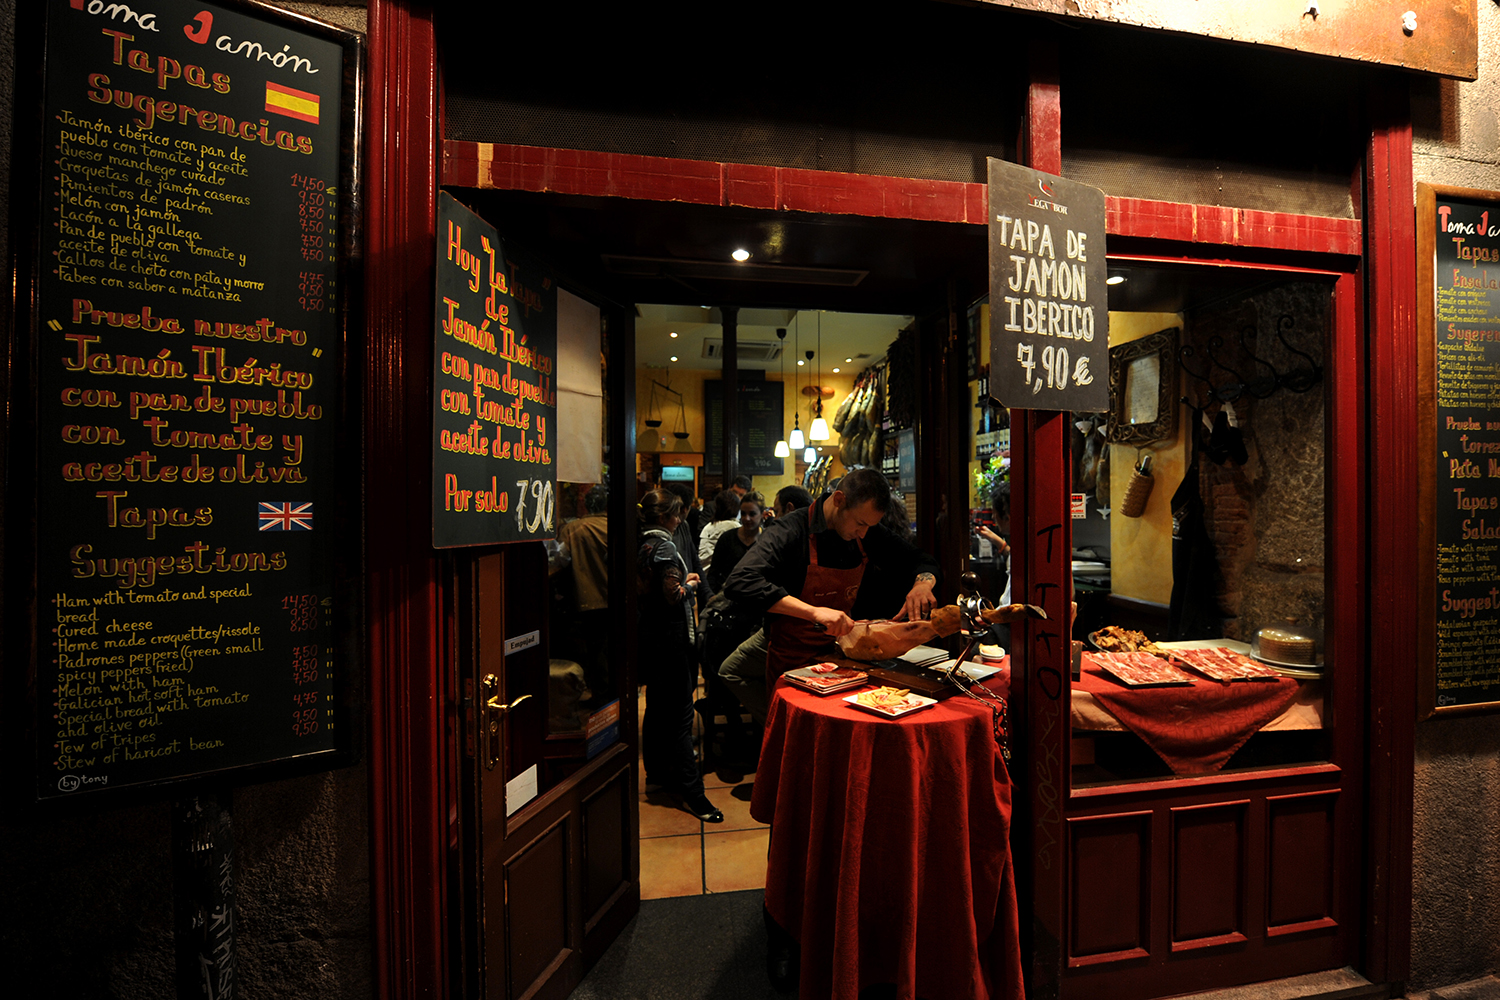 A waiter cuts Jamon Iberico at the entrance of one of the many tapas bars at Calle Cava Baja on Oct. 23, 2009 in Madrid, Spain.